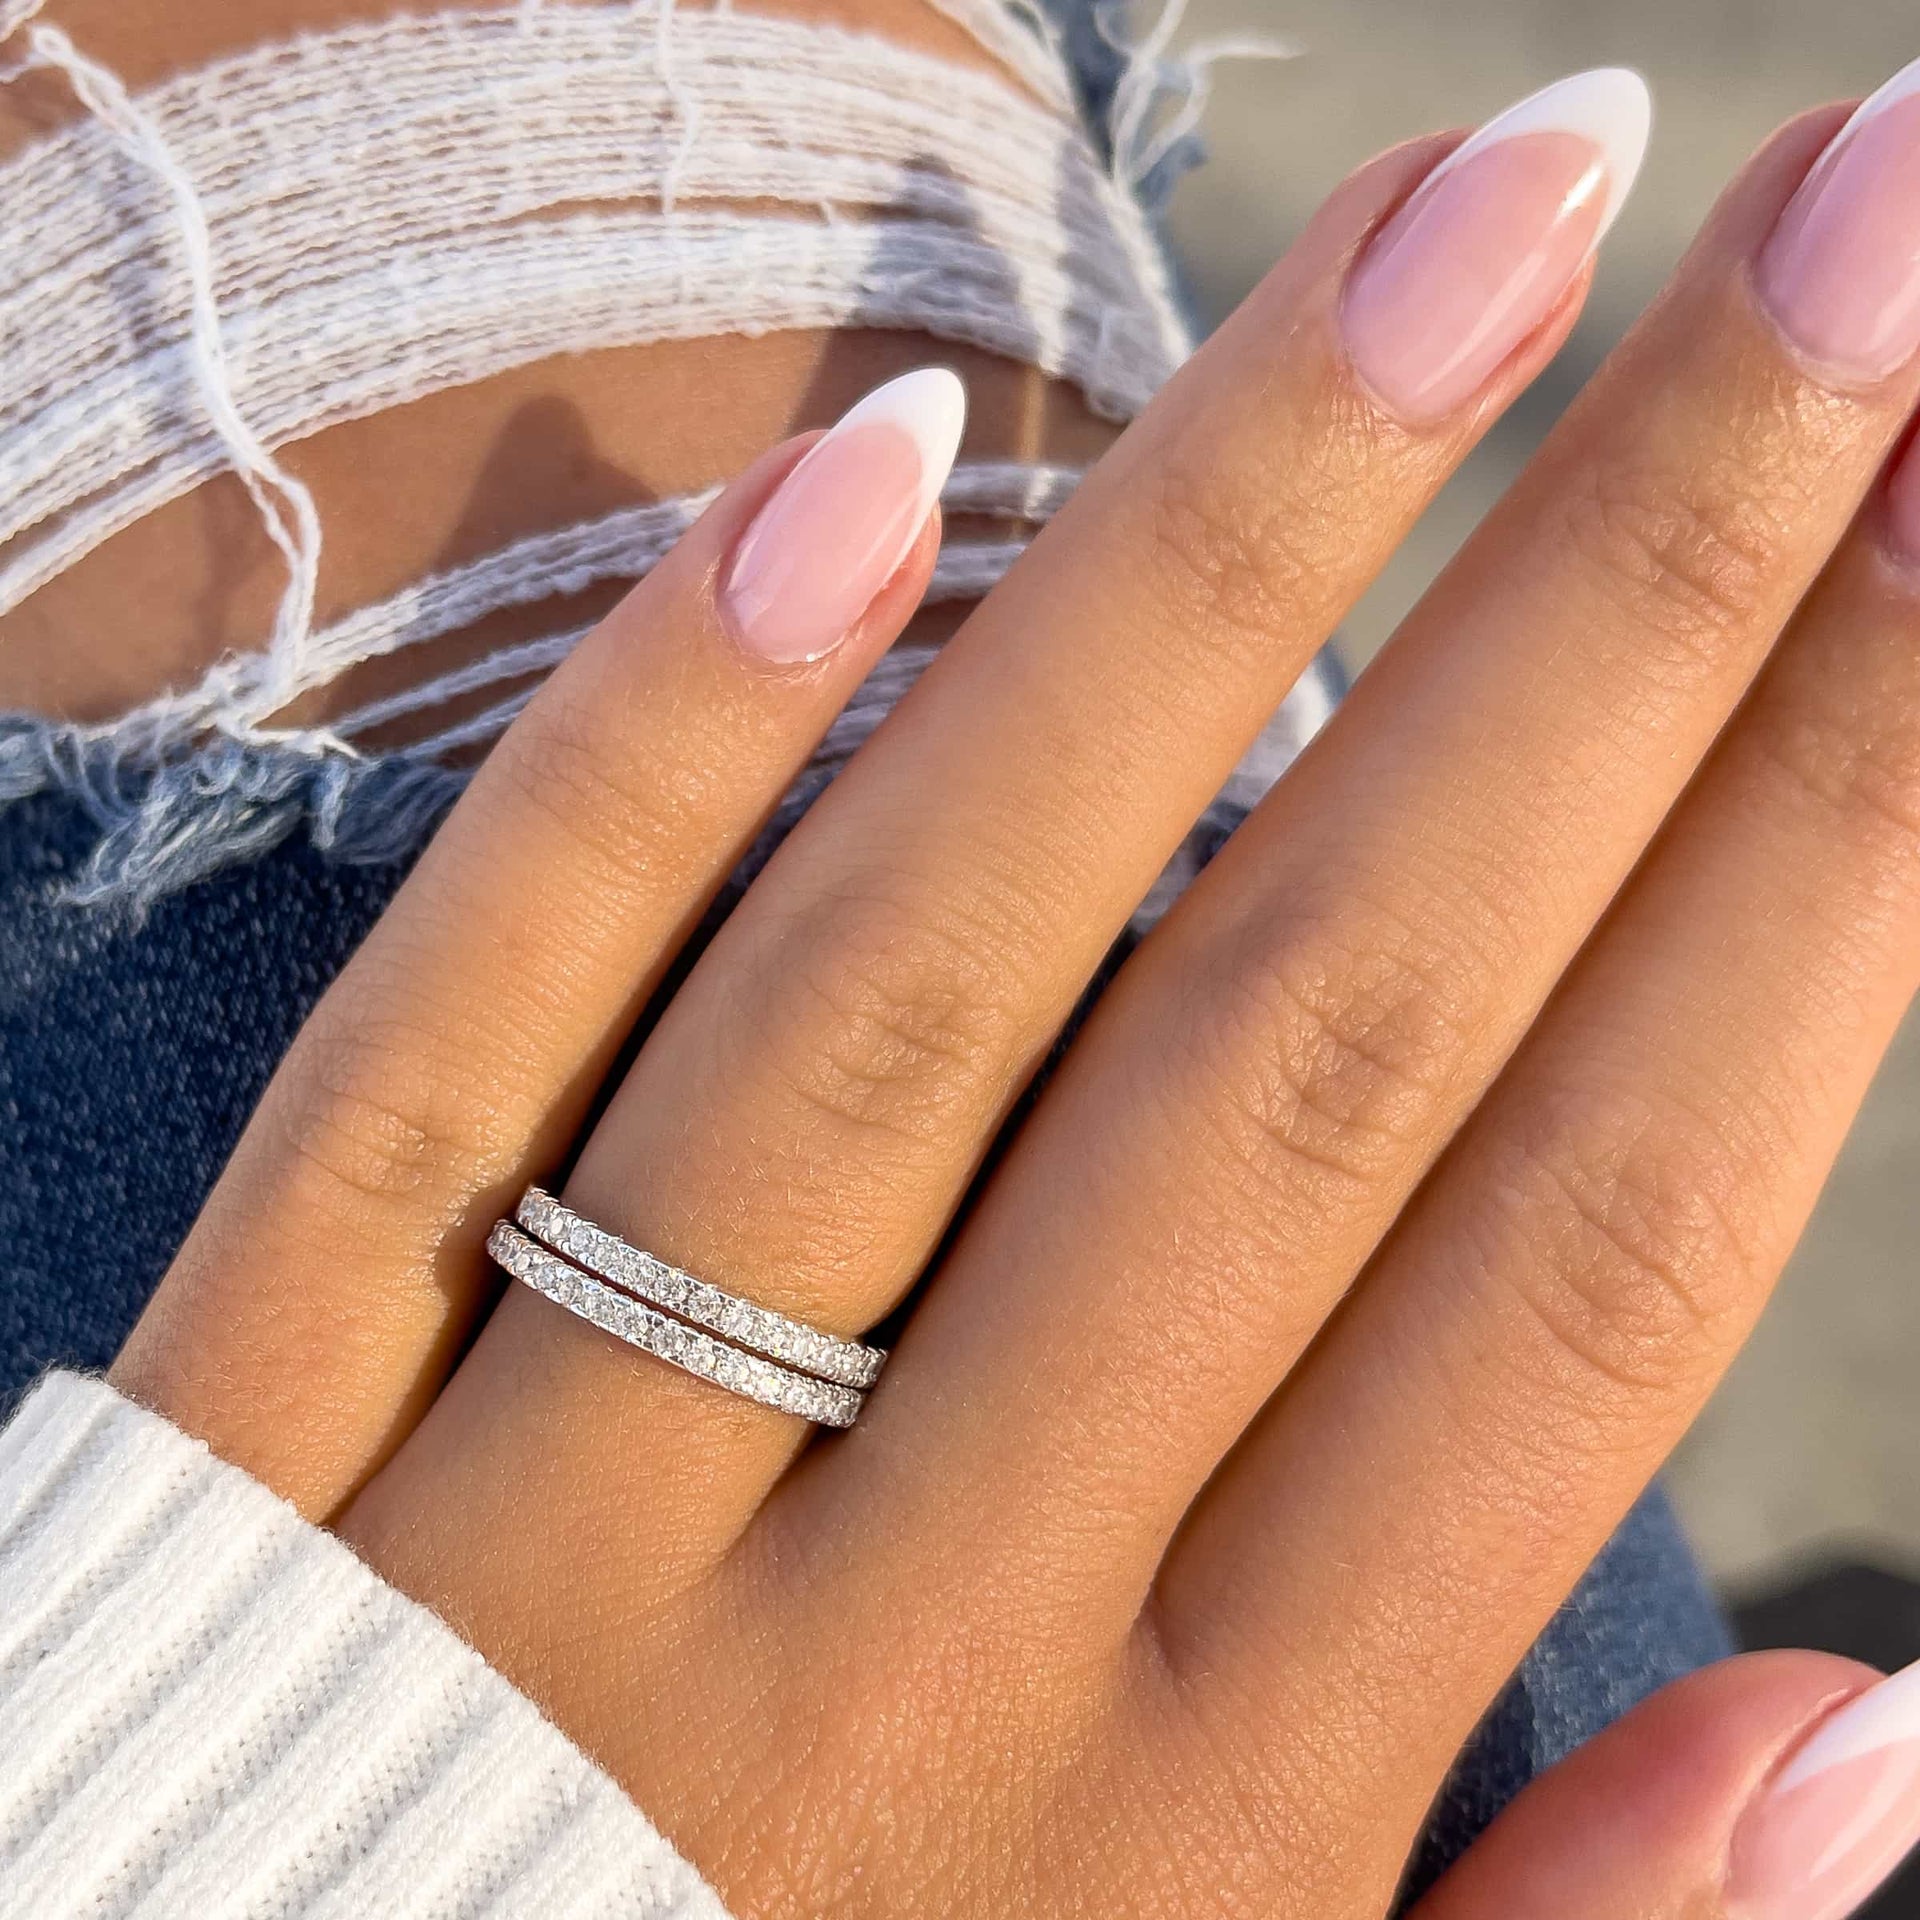 two wedding bands stacked on ladies finger with jeans and white sweater